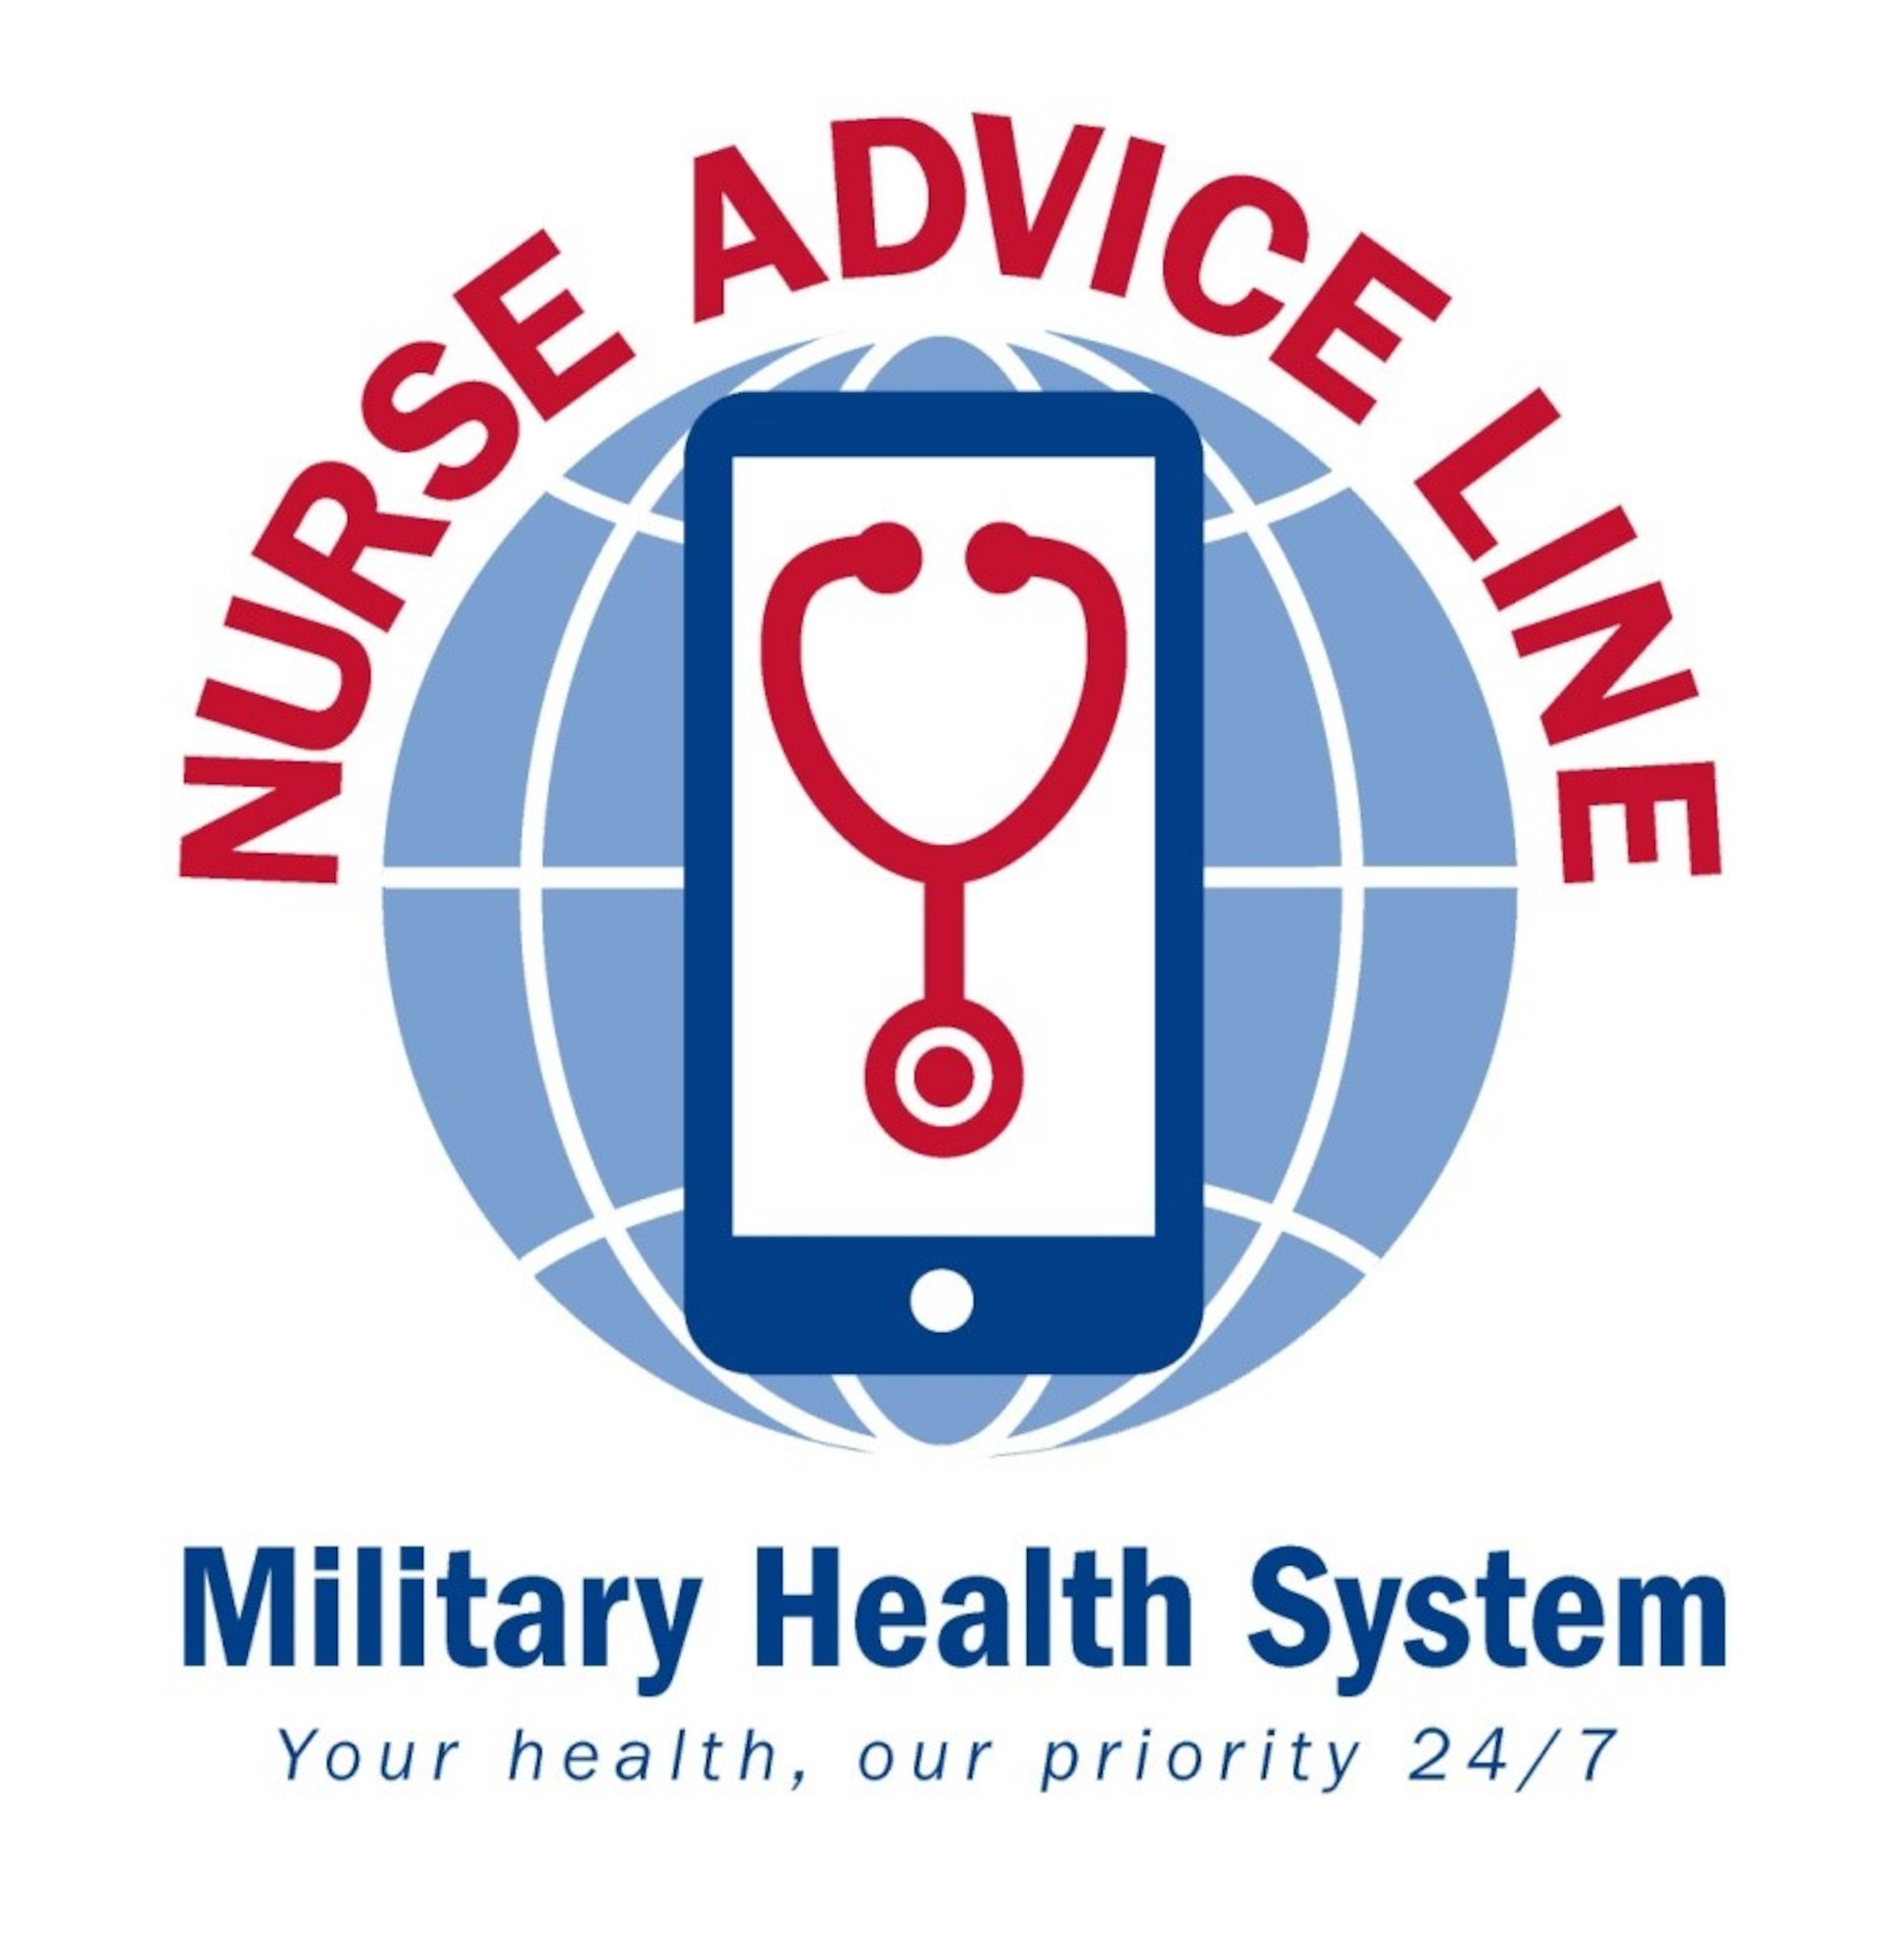 As of April 1, 2018 the MHS Nurse Advice Line expanded to include additional health care support services. The advice line is available by phone, web chat or video chat to beneficiaries who are anywhere in the world with a military treatment facility – including Guam, Puerto Rico, Cuba, South Korea, and Japan. (Graphic by Military Health System Communications Office)